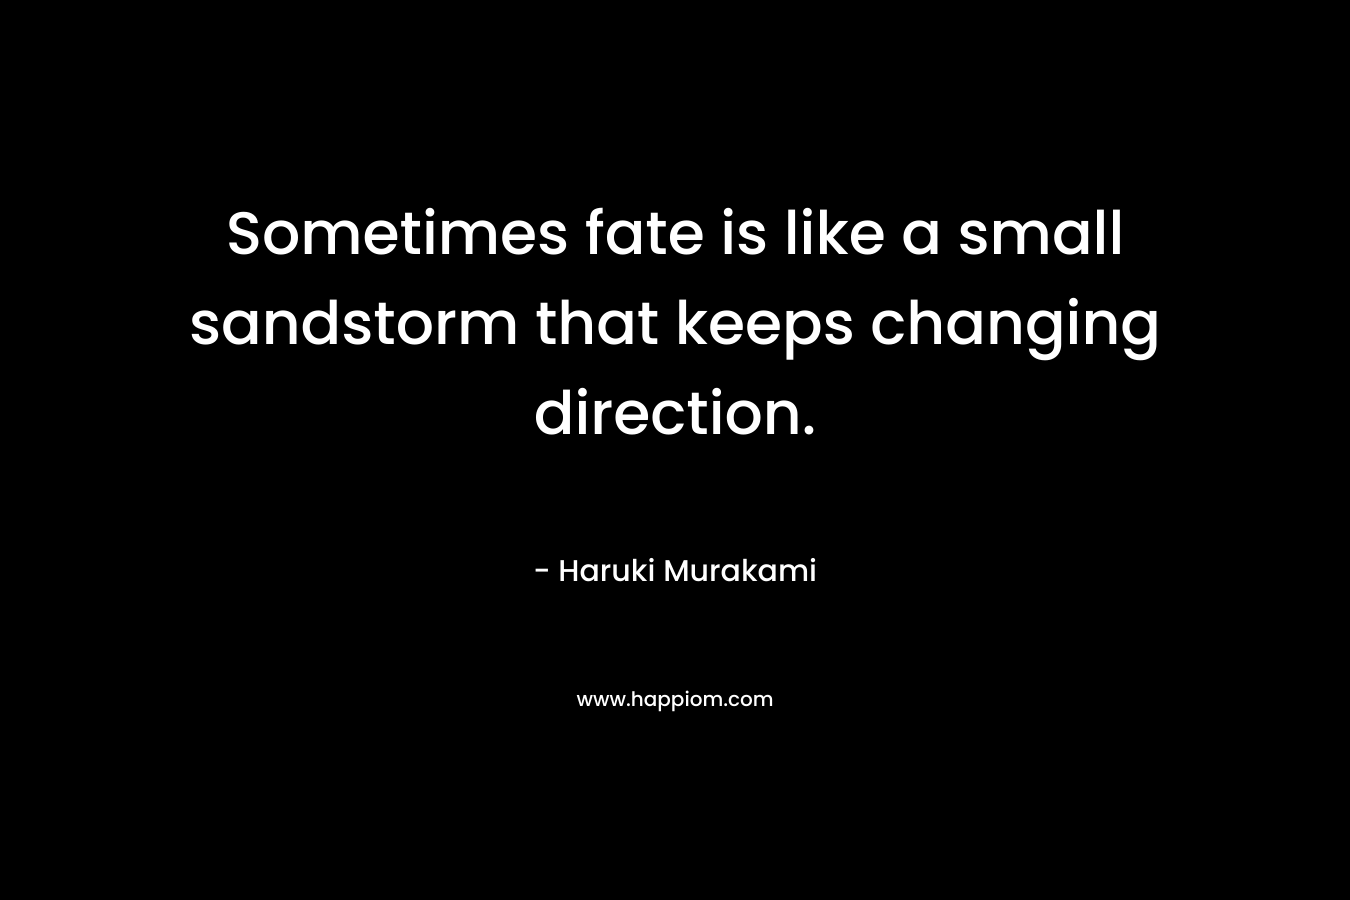 Sometimes fate is like a small sandstorm that keeps changing direction.